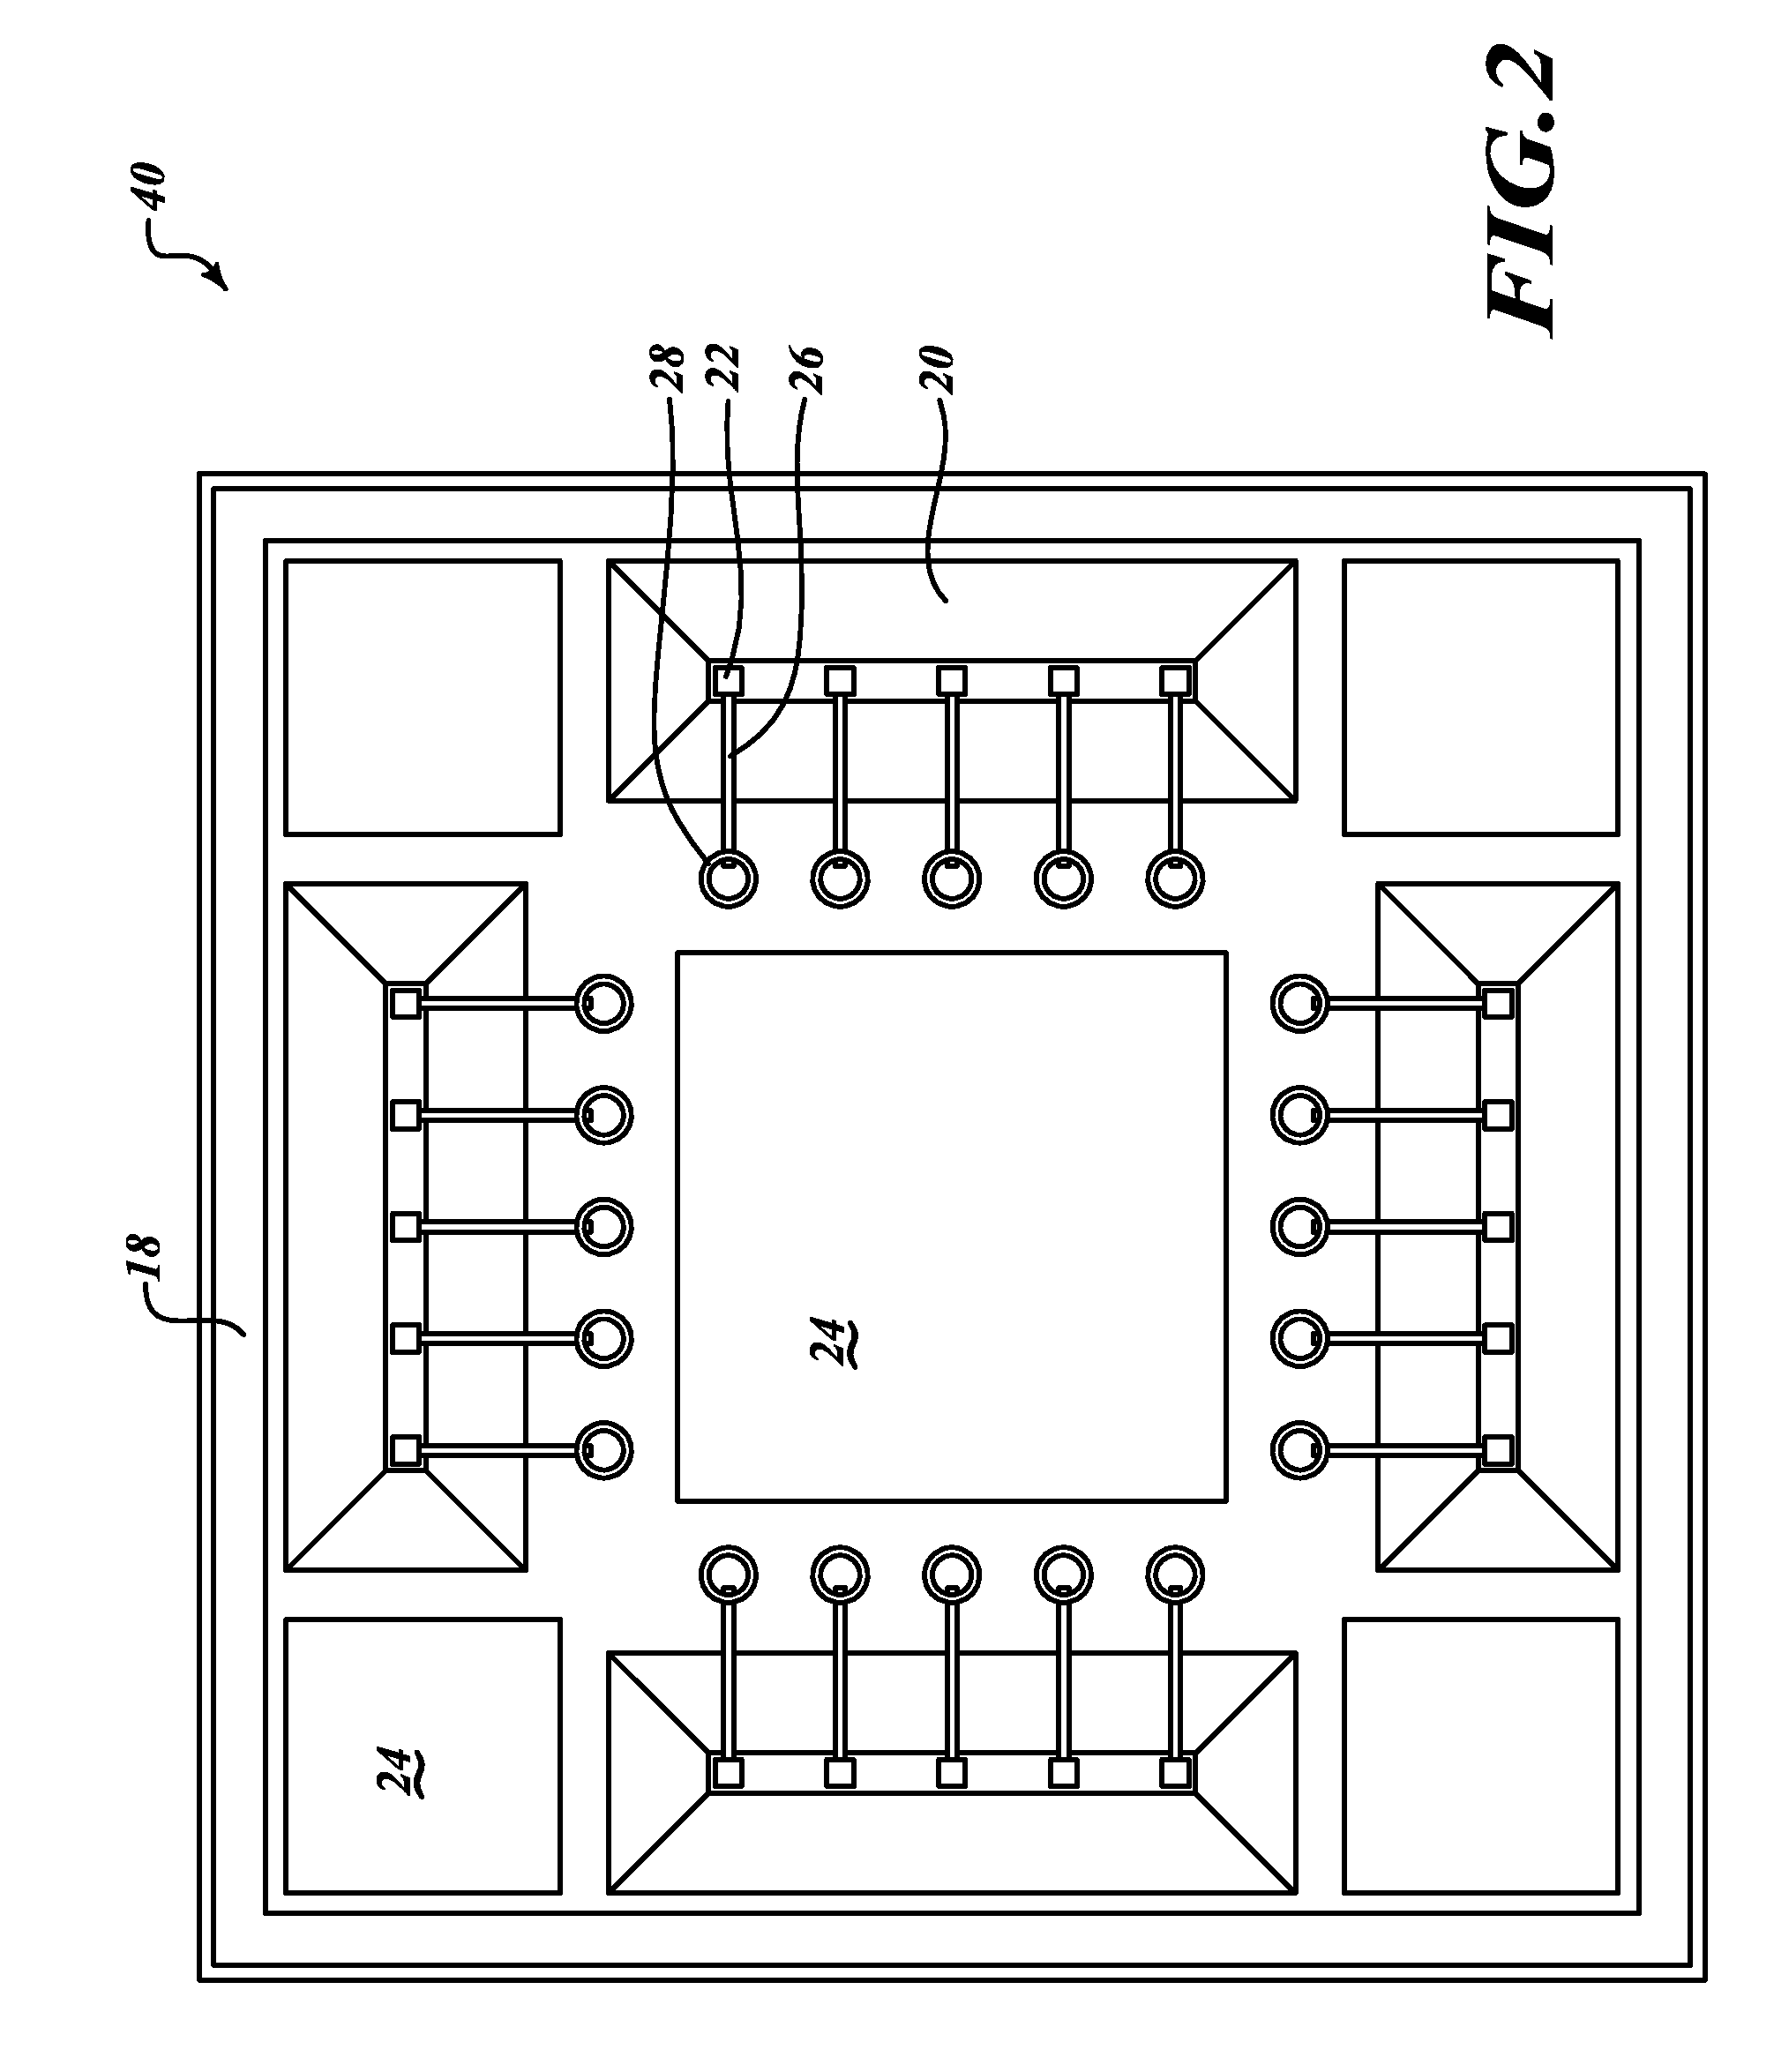 Systems and methods for implementing a wafer level hermetic interface chip